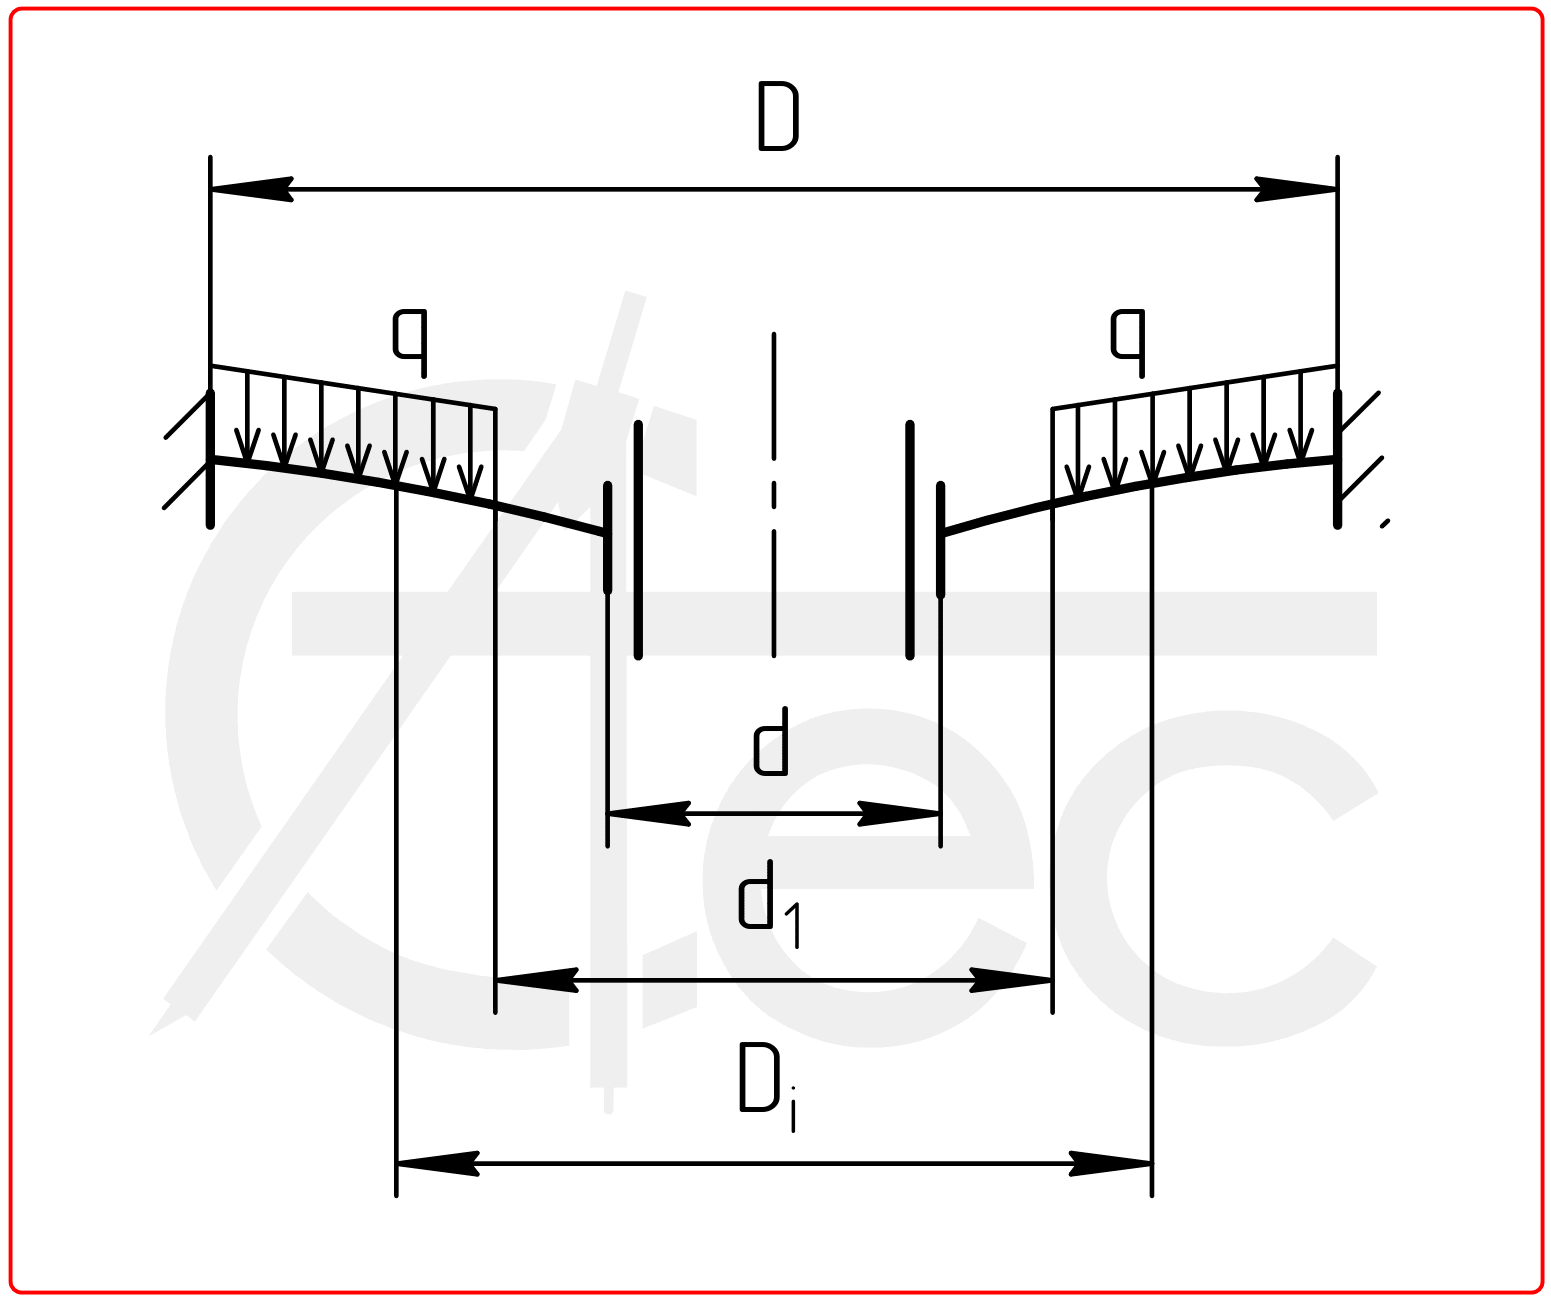 Circle plate with outer edge fixed and inner edge slided under uniform load